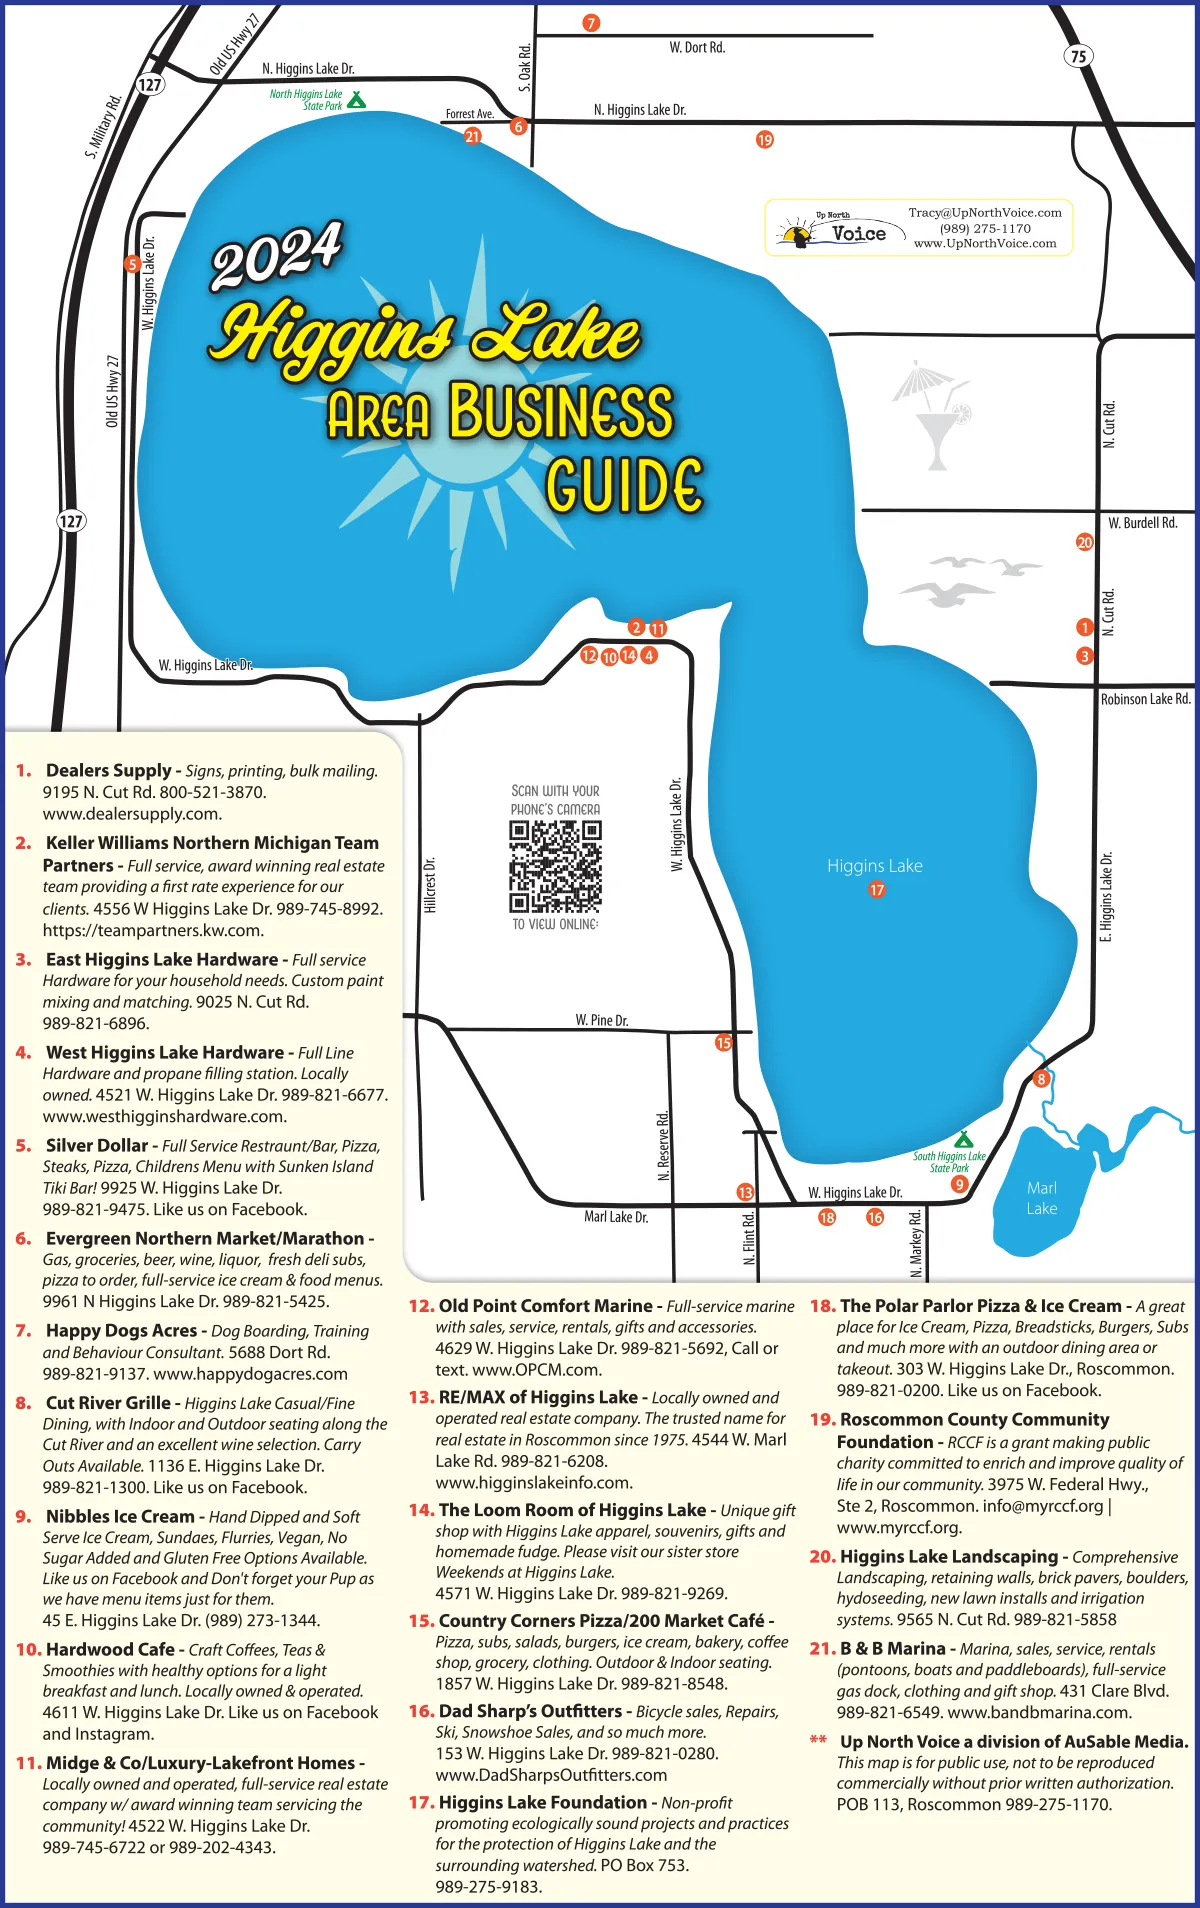 Higgins Lake, MI map with businesses